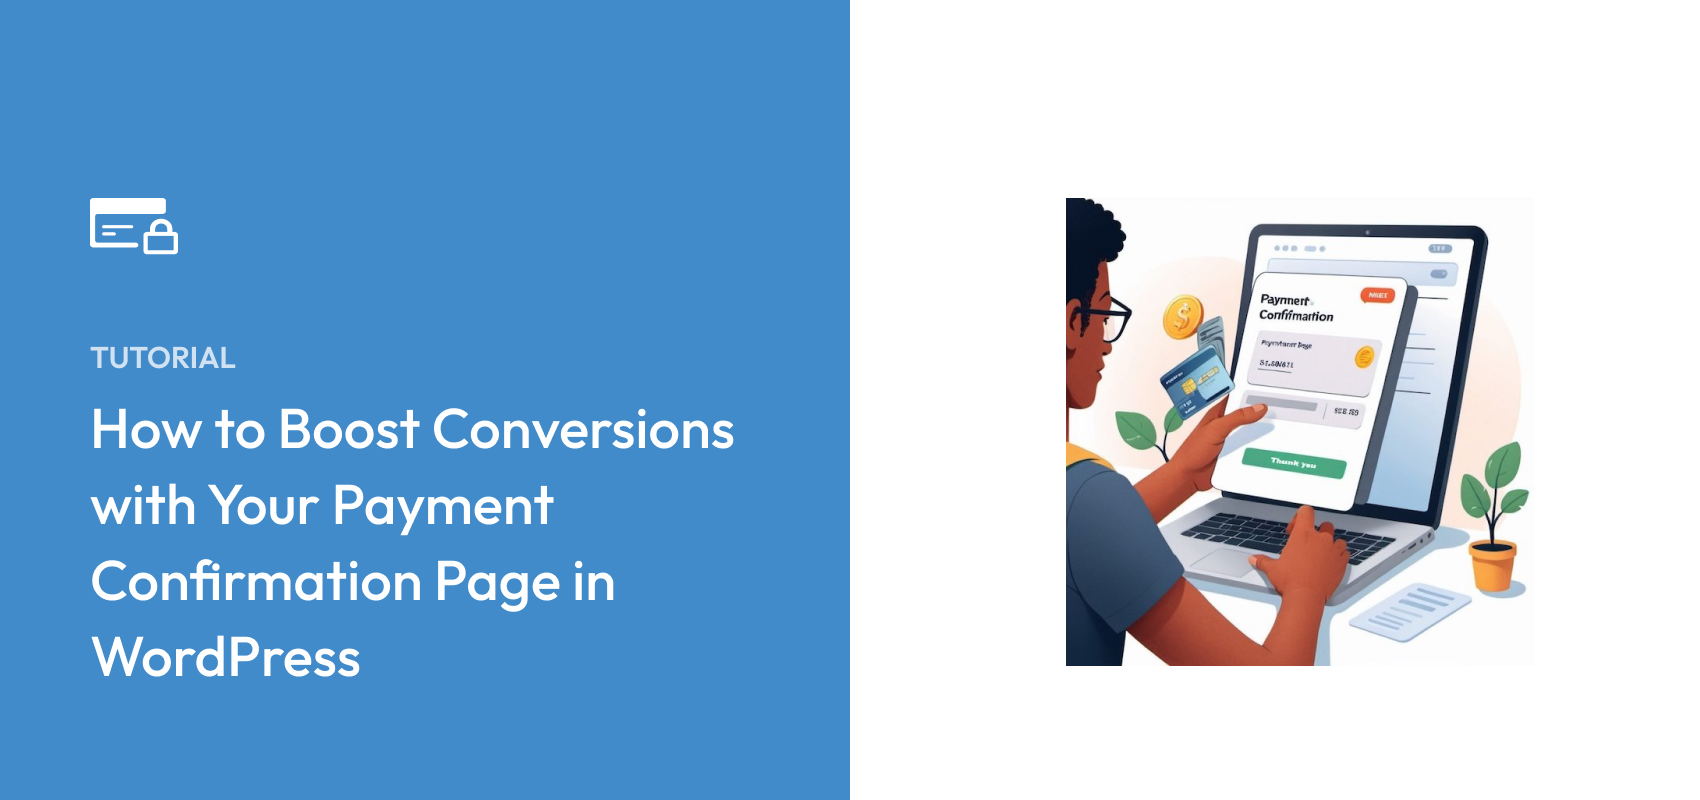 How to Boost Conversions with Your Payment Confirmation Pages in WordPress